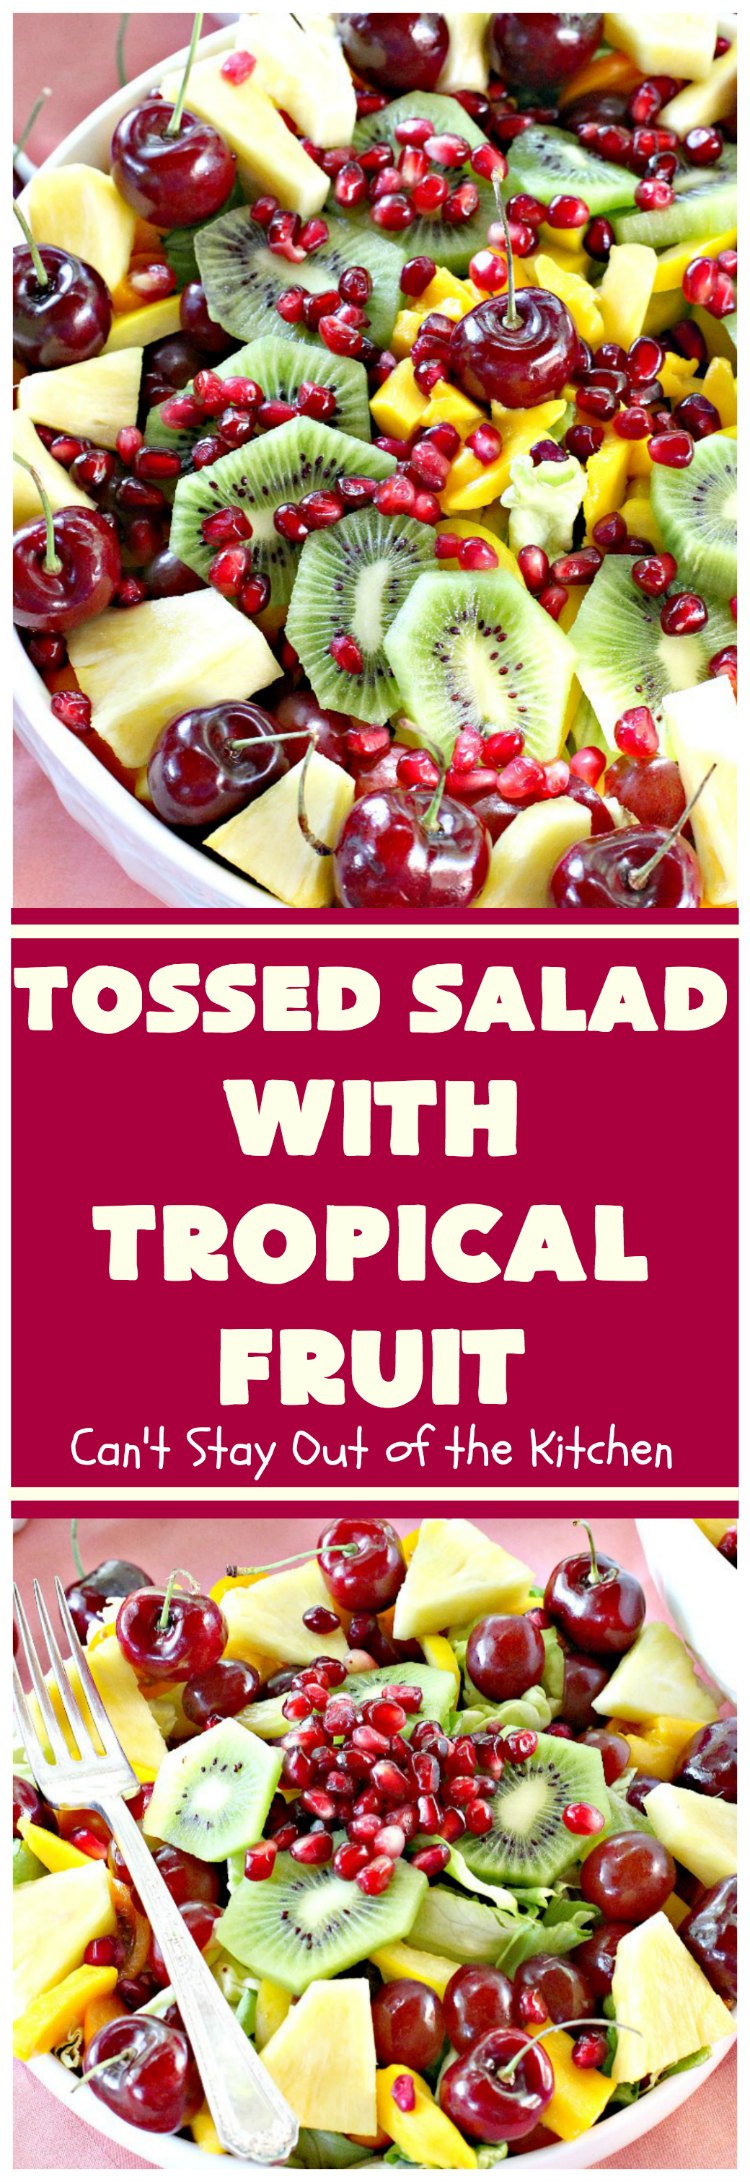 Tossed Salad with Tropical Fruit | Can't Stay Out of the Kitchen